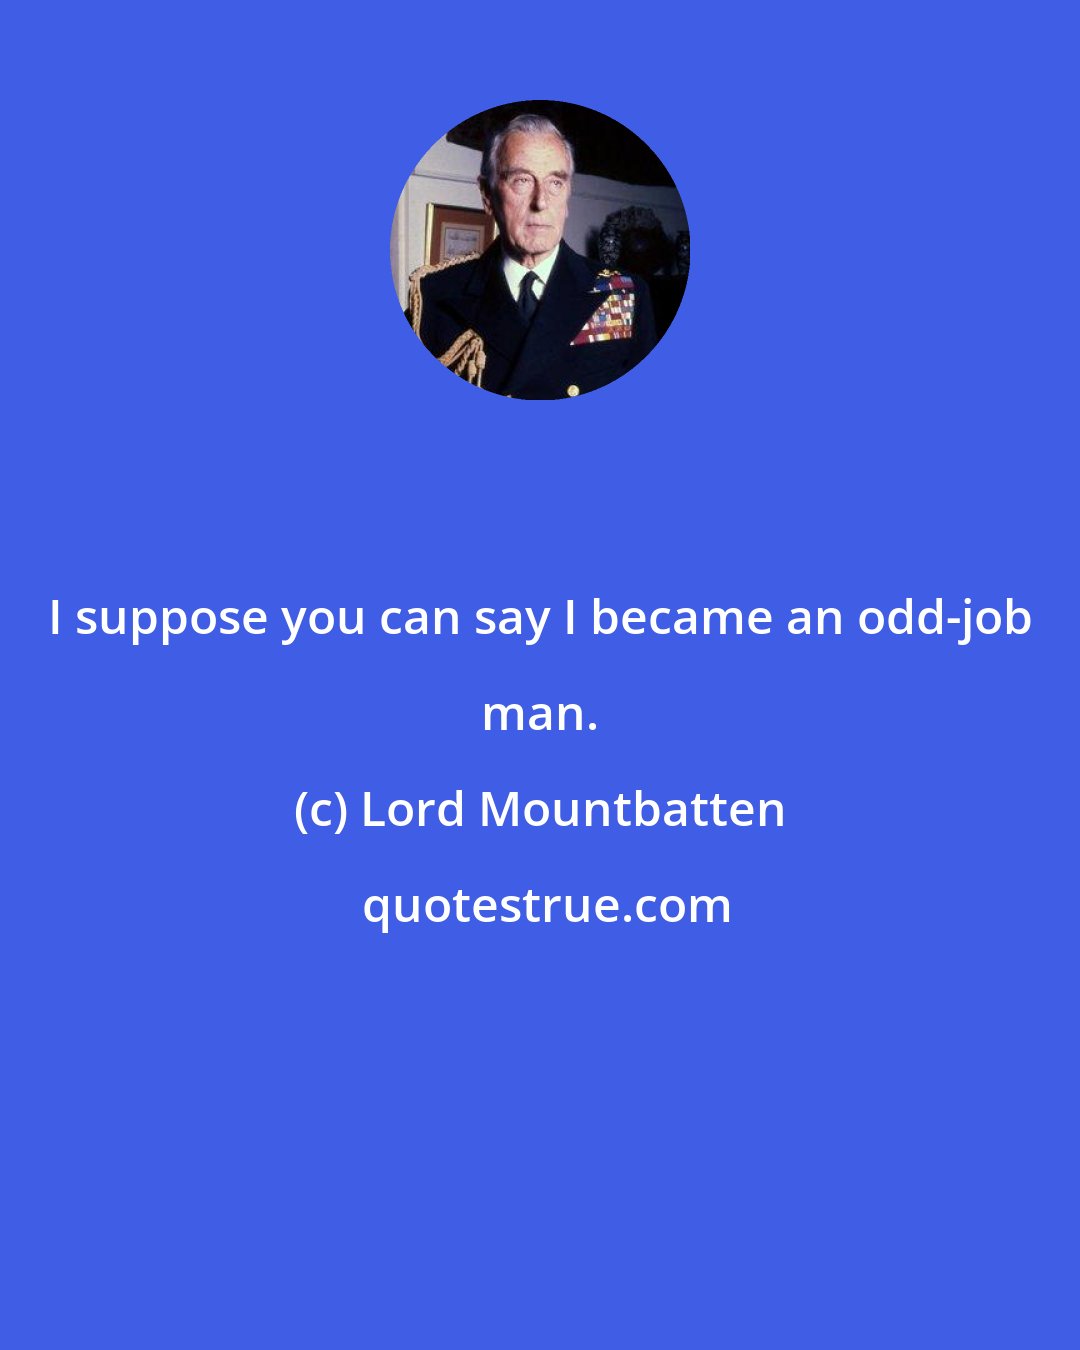 Lord Mountbatten: I suppose you can say I became an odd-job man.